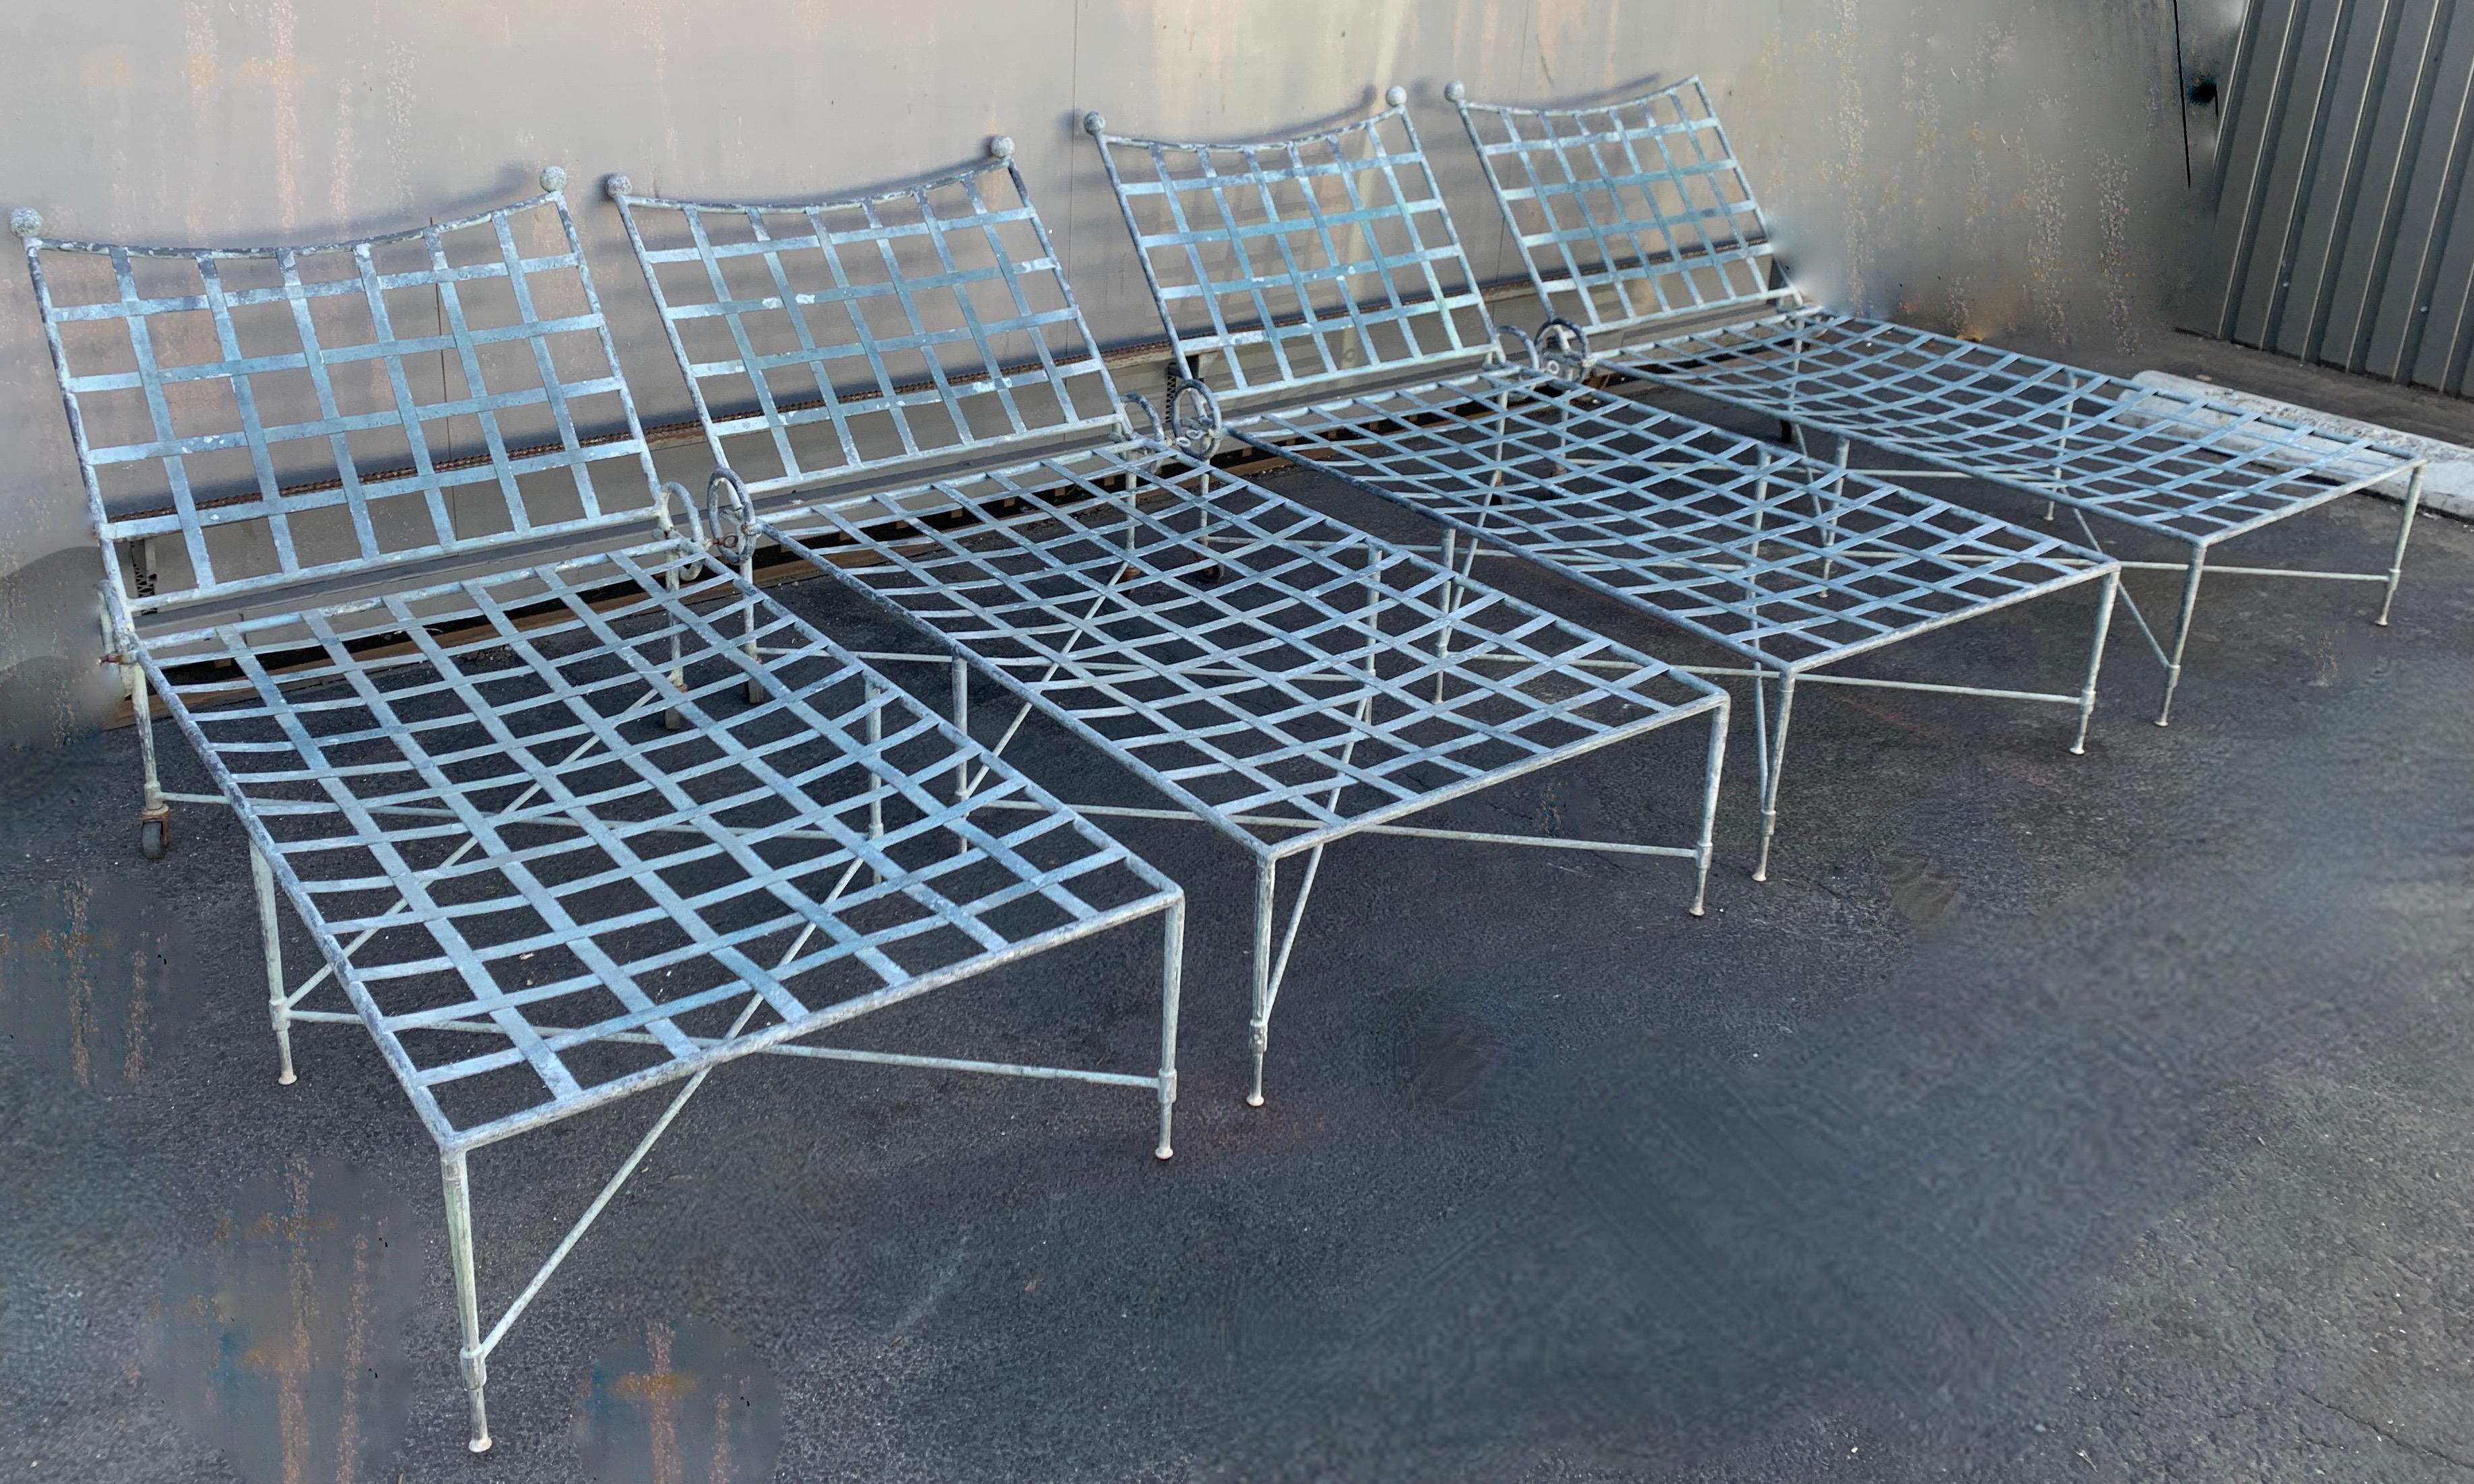 A Set of four Mario Papperzini for John Salterini pool lounges - the four are in the original verdigris finish with stationary reclined backs. We can fabricate cushions with COM. The condition overall is good with some expected loss to the rear of